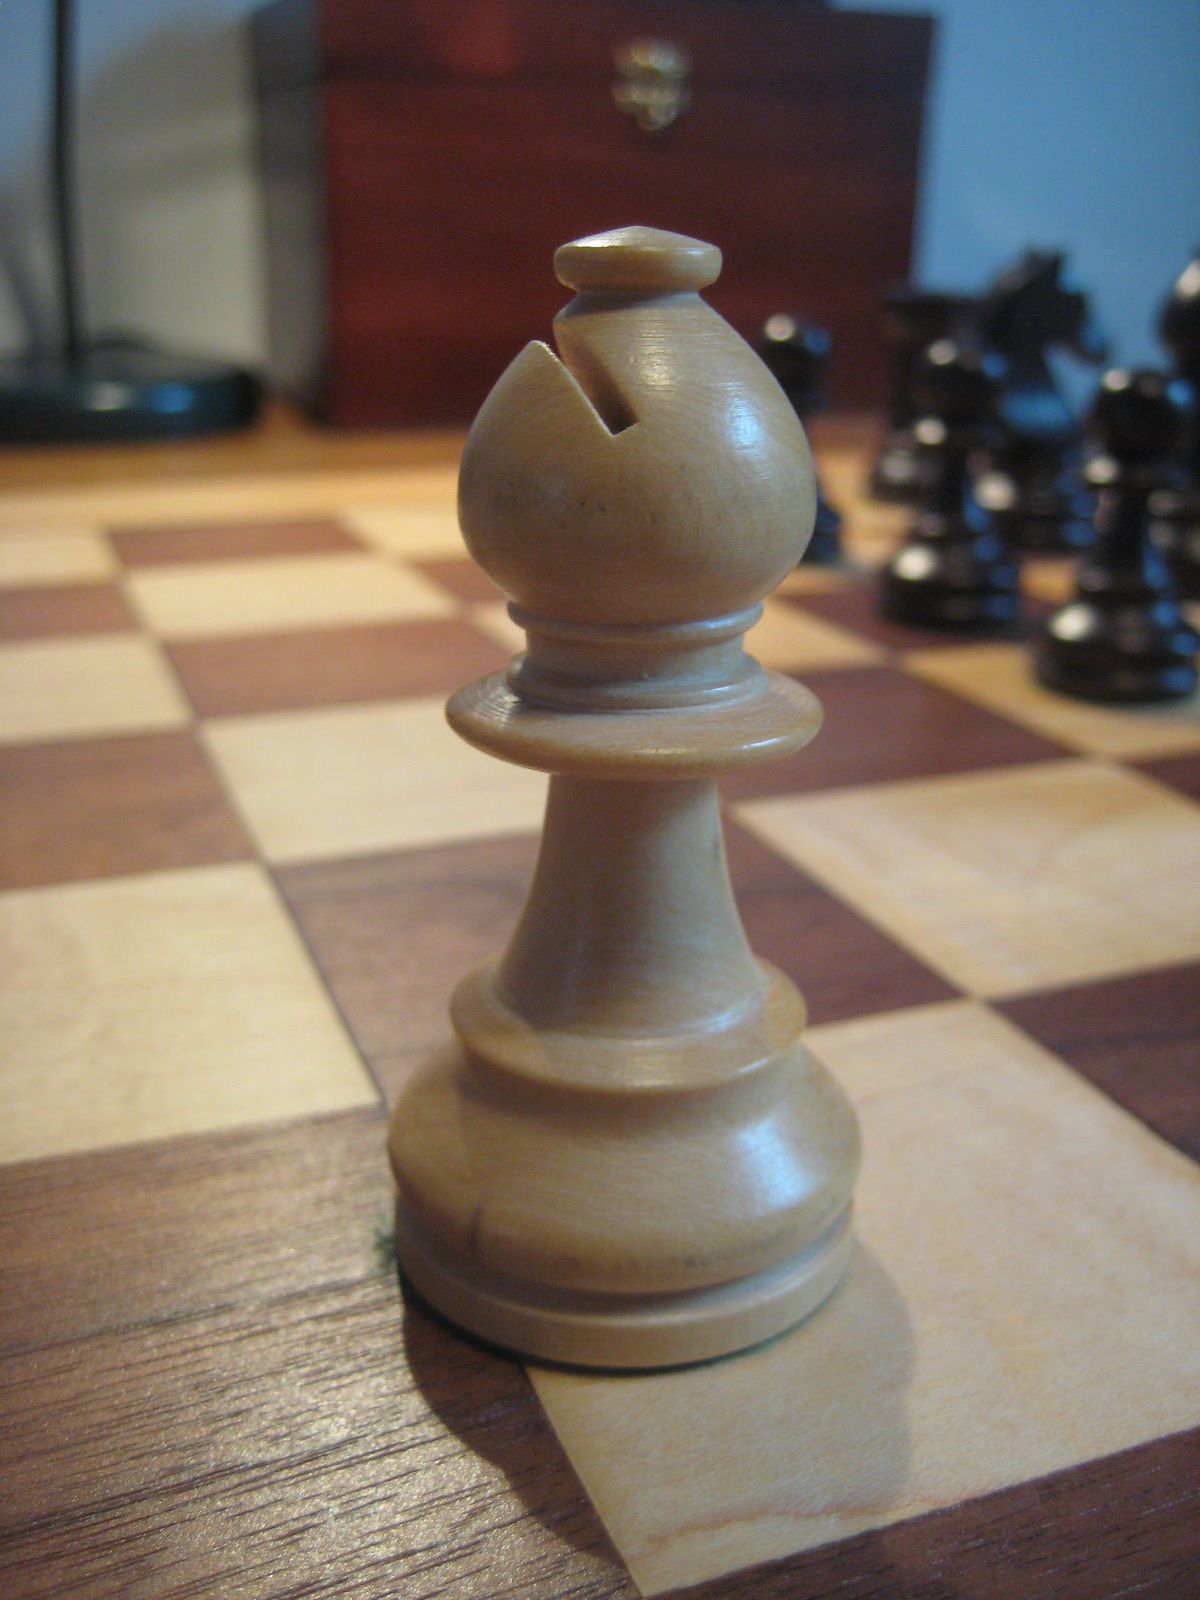 Combo of Reproduced 90s French Chavet Championship Tournament Chess Pieces  V2.0 in Ebonized / Box Wood - 3.6 King with Wooden Chess Board & Storage